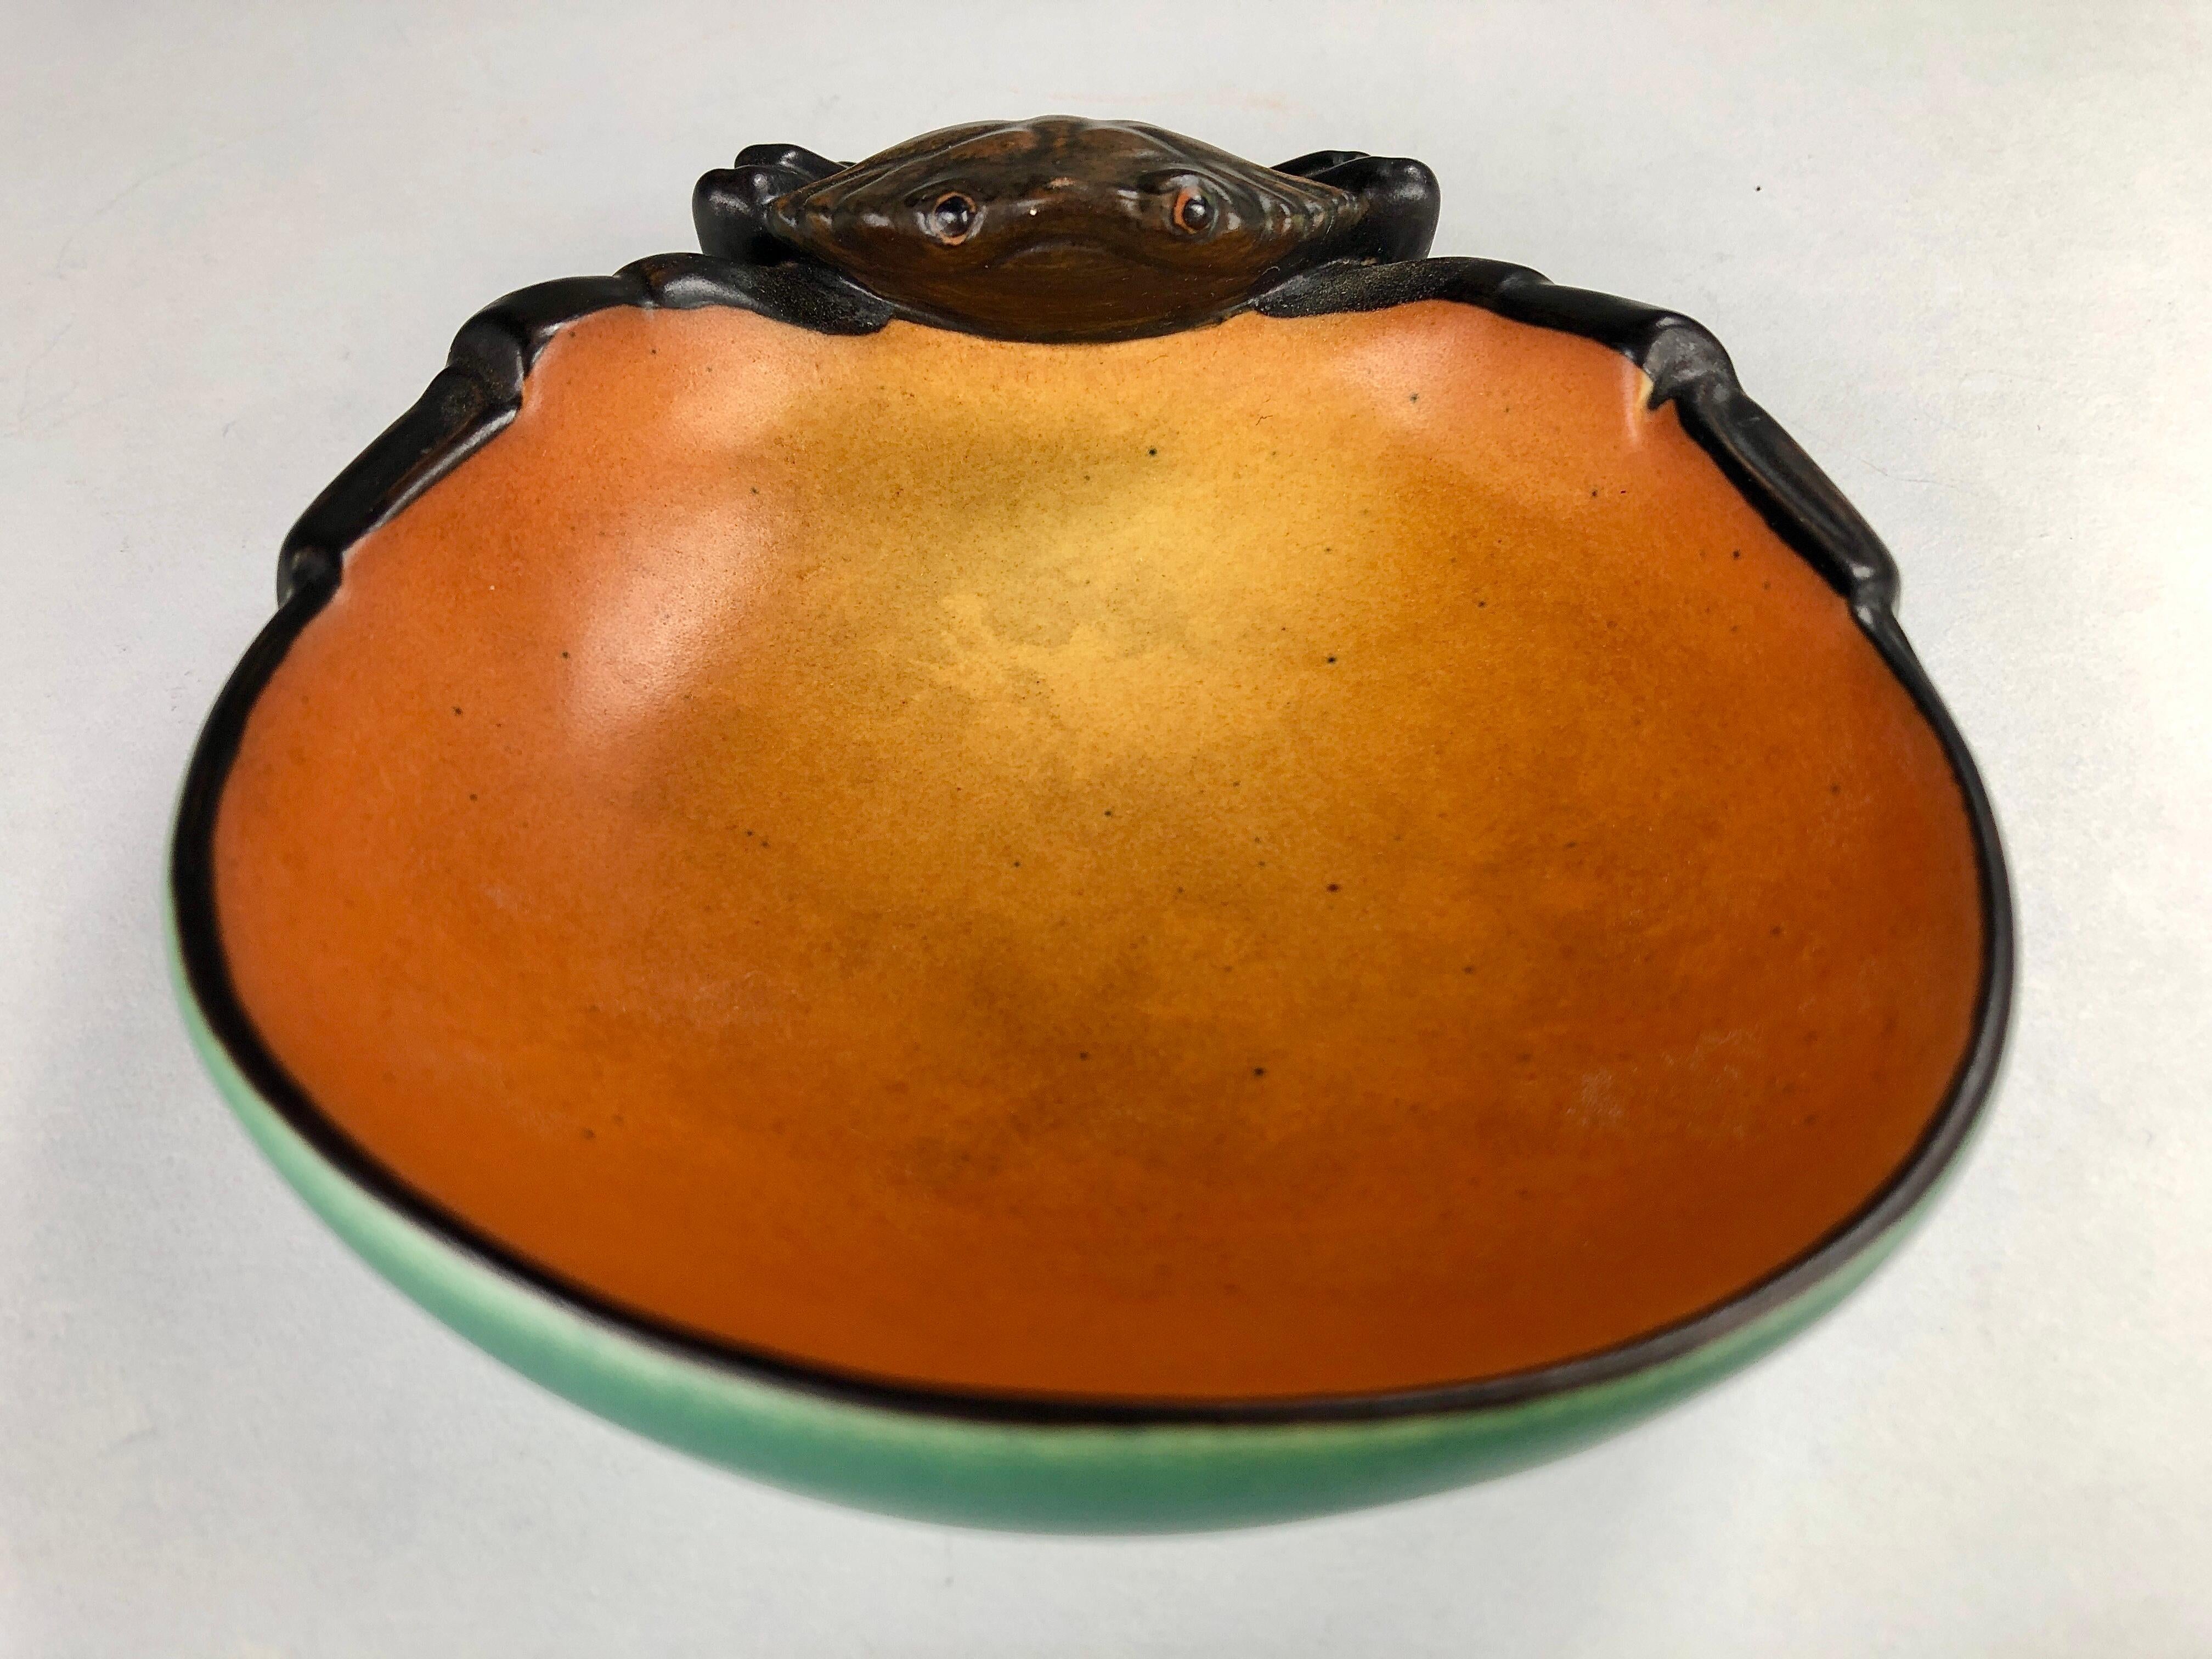 Danish hand-crafted art nouveau ash tray / bowl by Georg Jensen for P. Ipsens Enke in 1903.

The art nuveau ash tray / bowl feature a well made lively crab and is in excellent condition.

Georg Jensen (1866-1935) was a leading Danish silversmith and